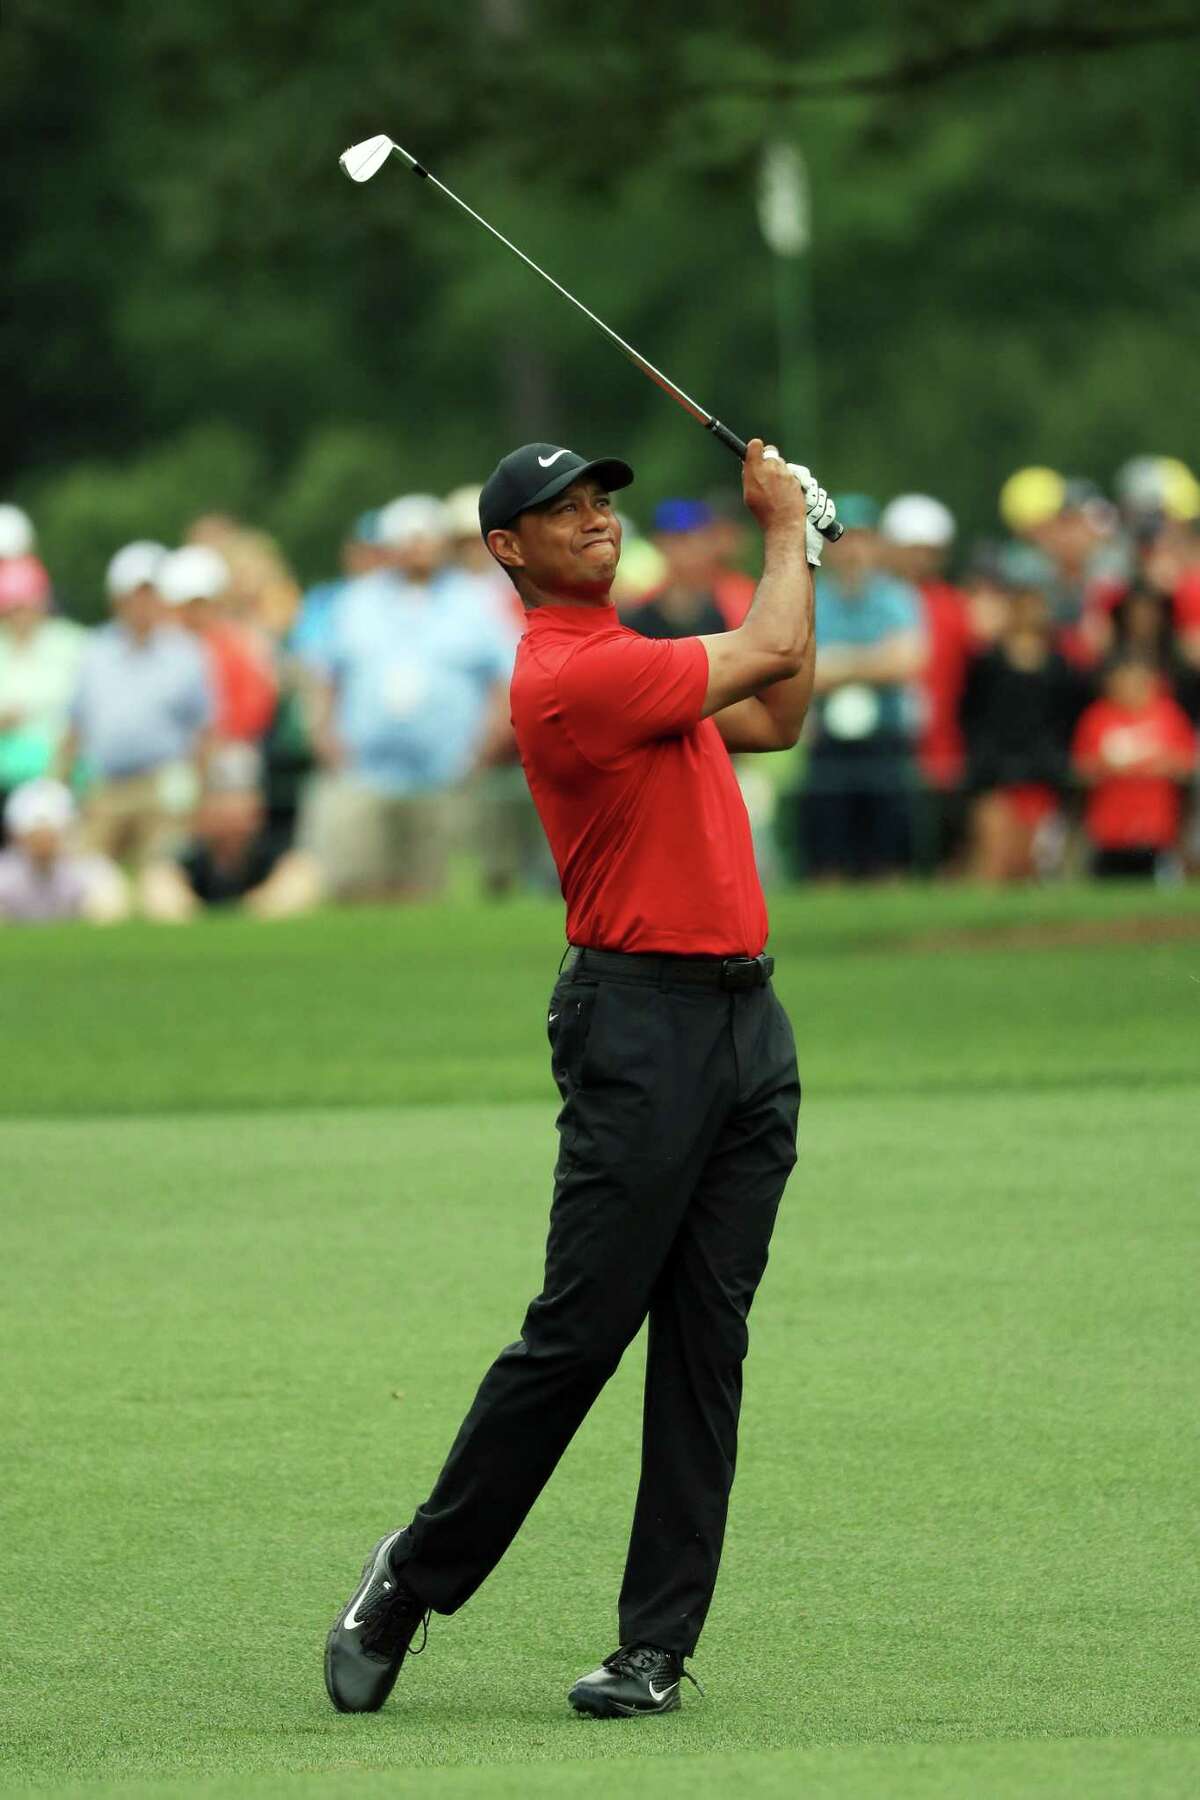 AUGUSTA, GEORGIA - APRIL 14: Tiger Woods of the United States plays an approach on the seventh hole during the final round of the Masters at Augusta National Golf Club on April 14, 2019 in Augusta, Georgia. (Photo by Mike Ehrmann/Getty Images)